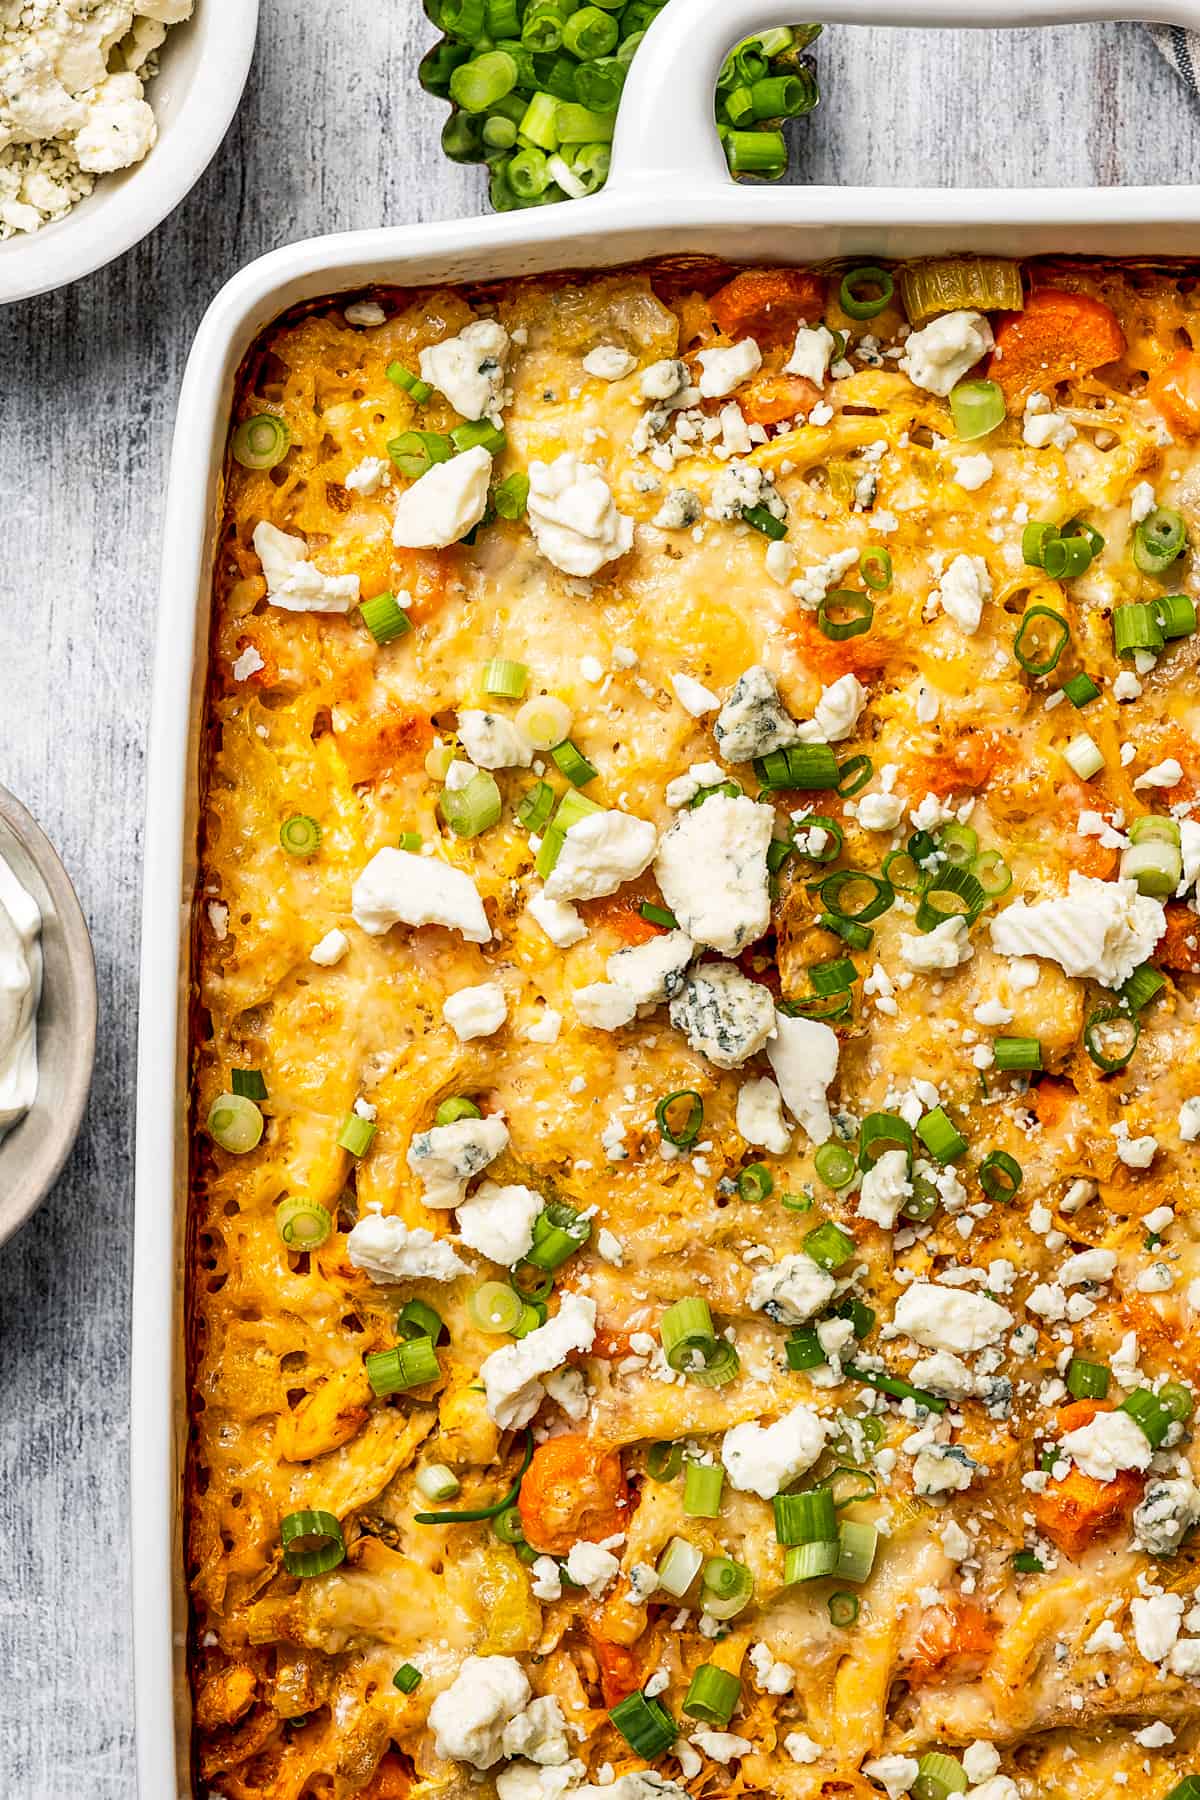 A cheesy casserole topped with blue cheese crumbles and sliced green onions.